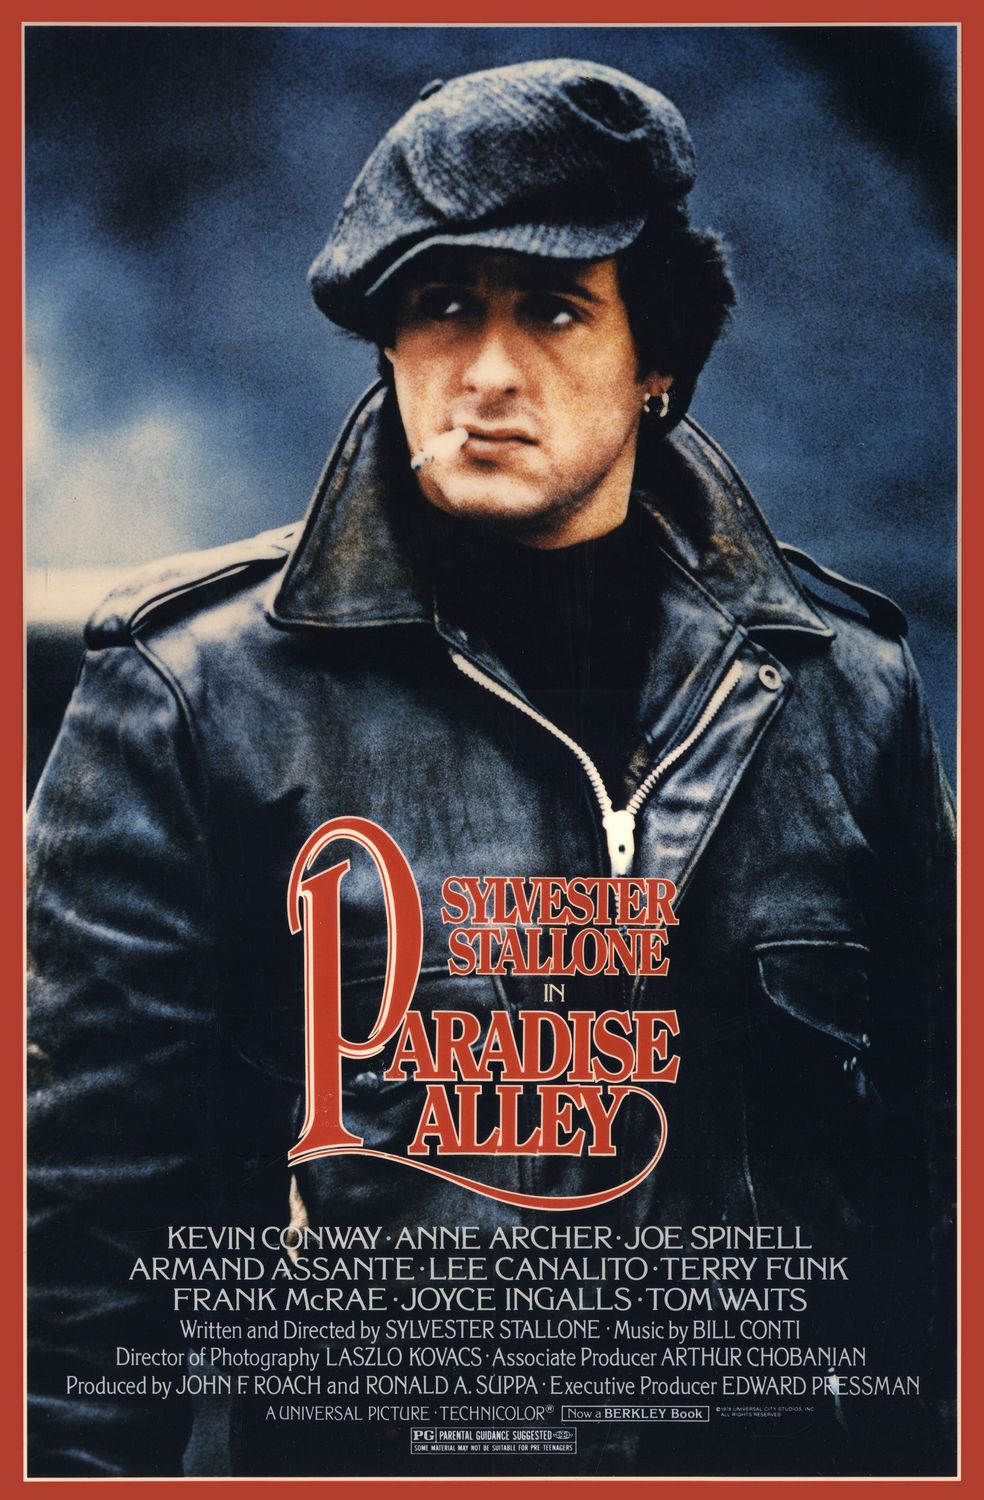 Extra Large Movie Poster Image for Paradise Alley 